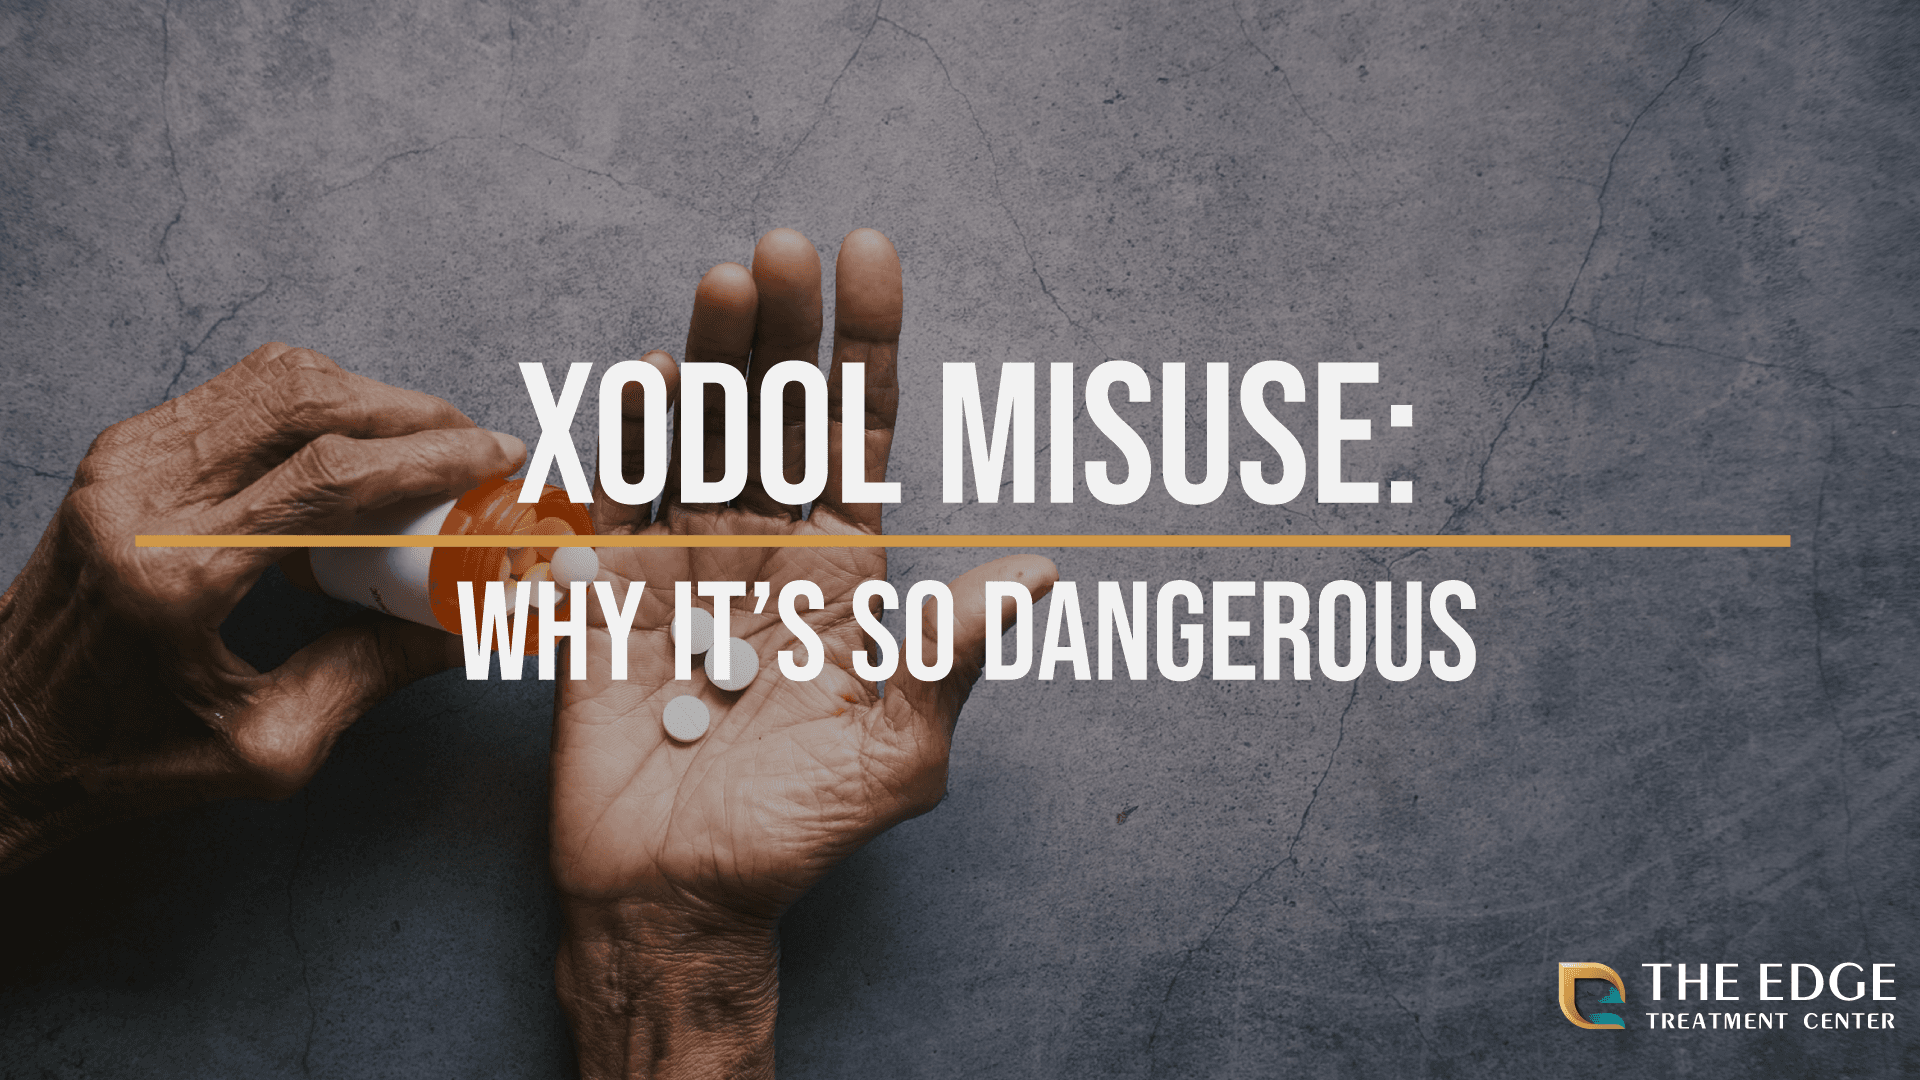 What is Xodol Misuse?